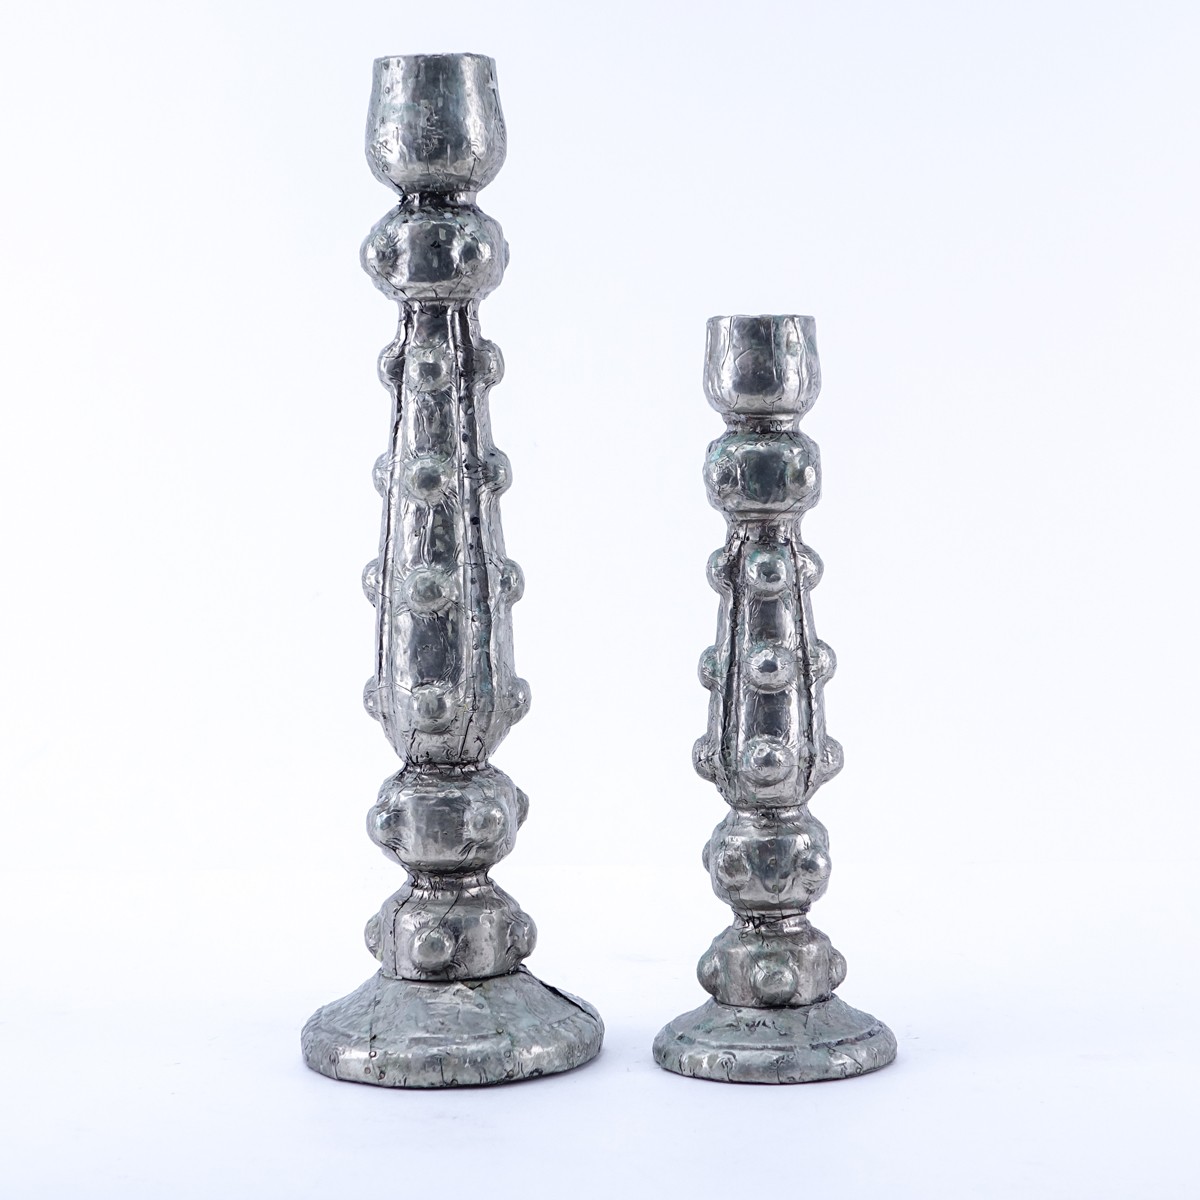 Two (2) Foil Clad Candlesticks. Unsigned. Wax residue. Measures 16" H & 12" H.  (estimate $25-$50) 